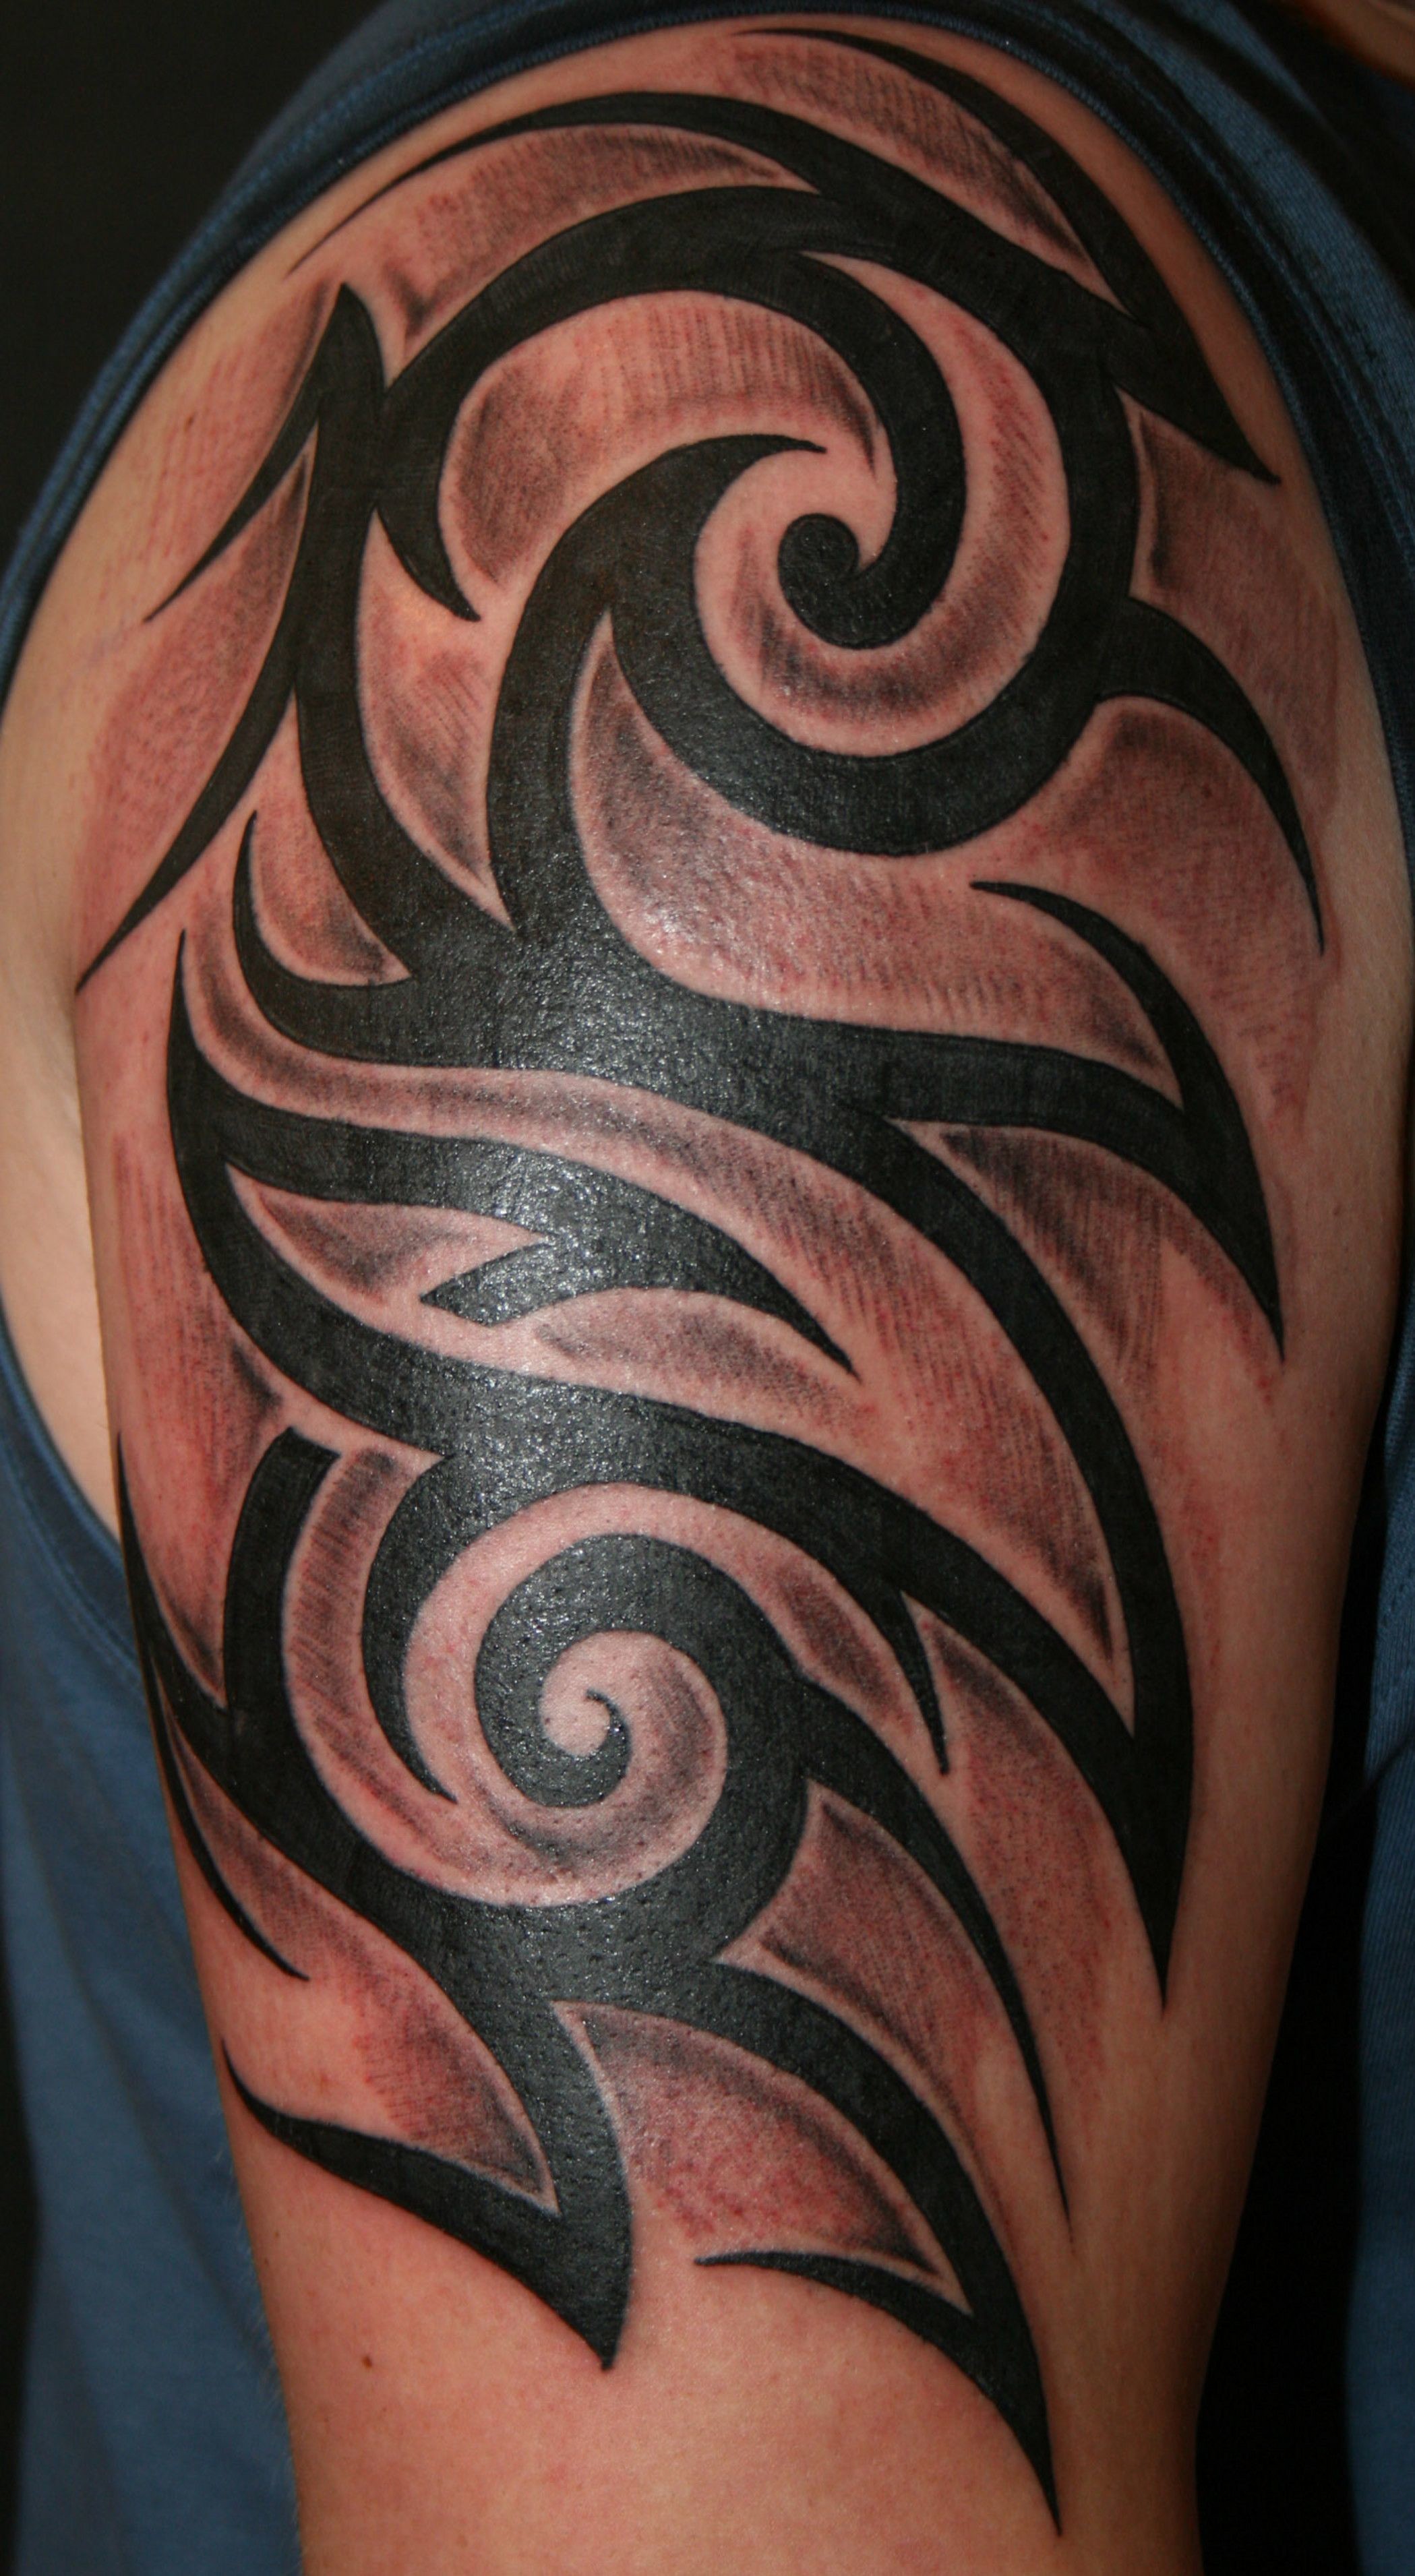 2099x3822 20 Tribal Sleeve Tattoos Design Ideas for Men and Women